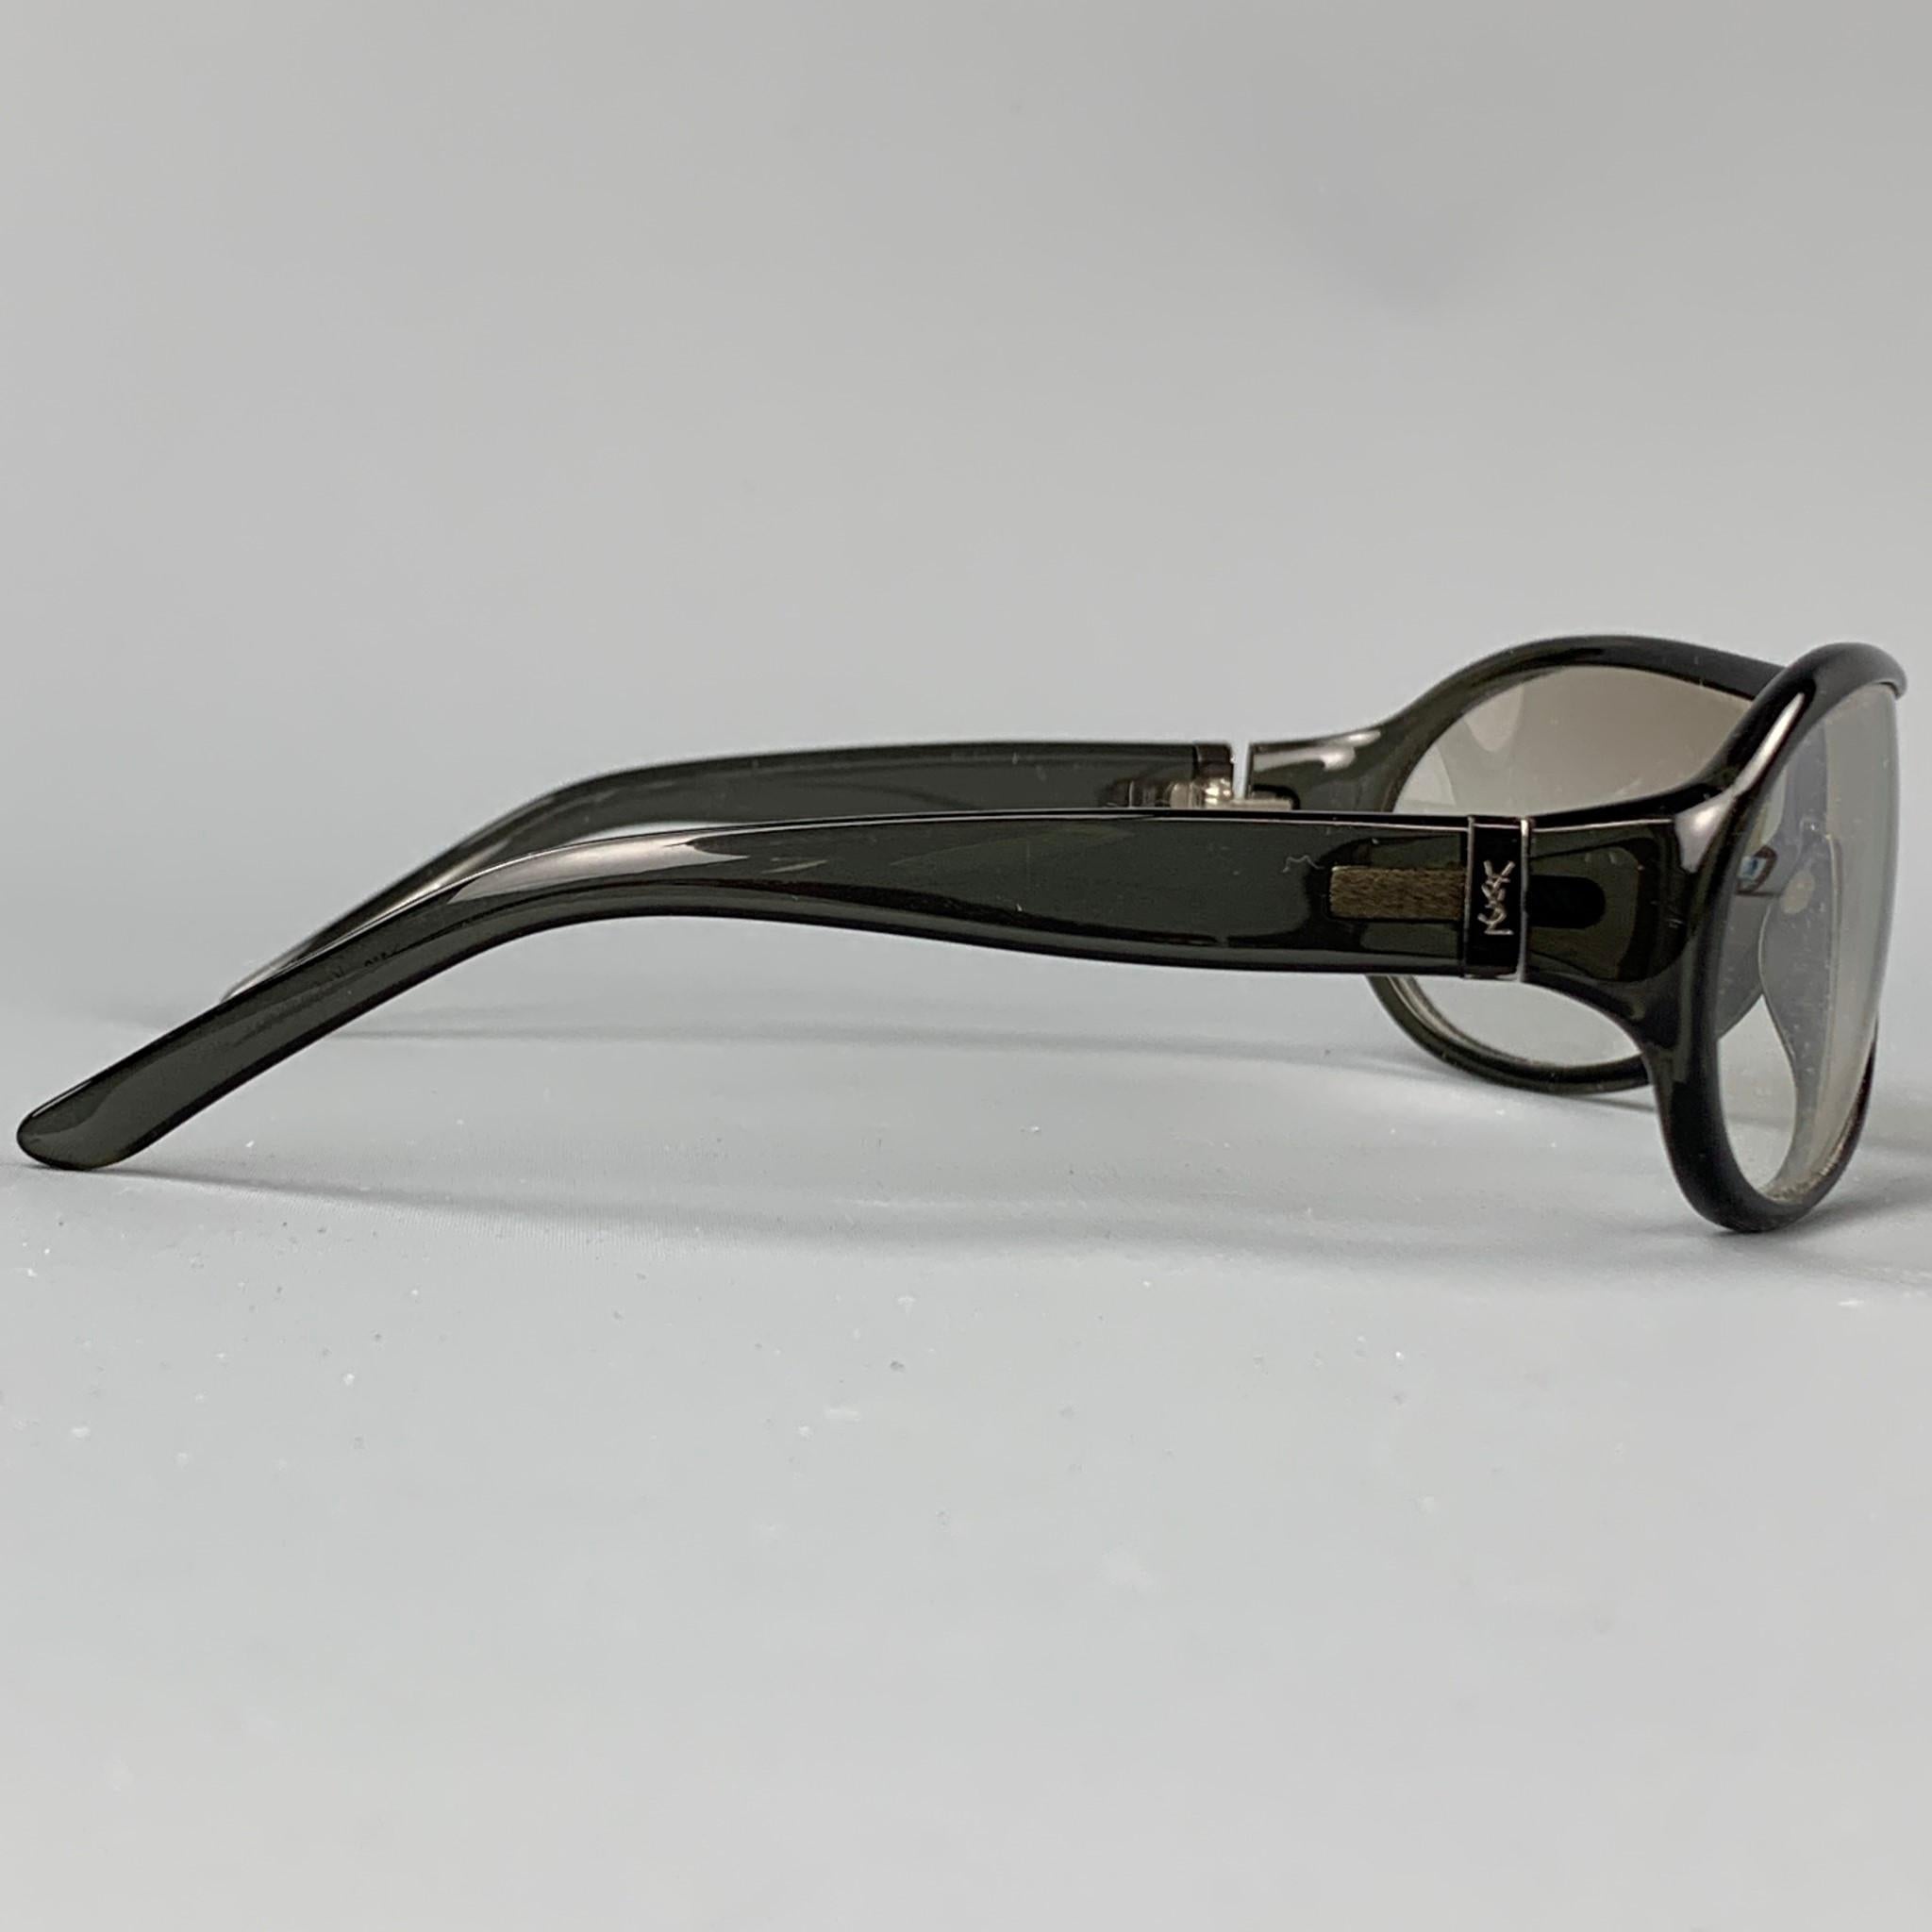 YVES SAINT LAURENT by TOM FORD sunglasses comes in a grey acetate with clear tinted lenses. Made in Italy.

Good Pre-Owned Condition.
Marked: YSL 2003/S 915

Measurements:

Length: 11 cm.
Height: 4.5 cm. 